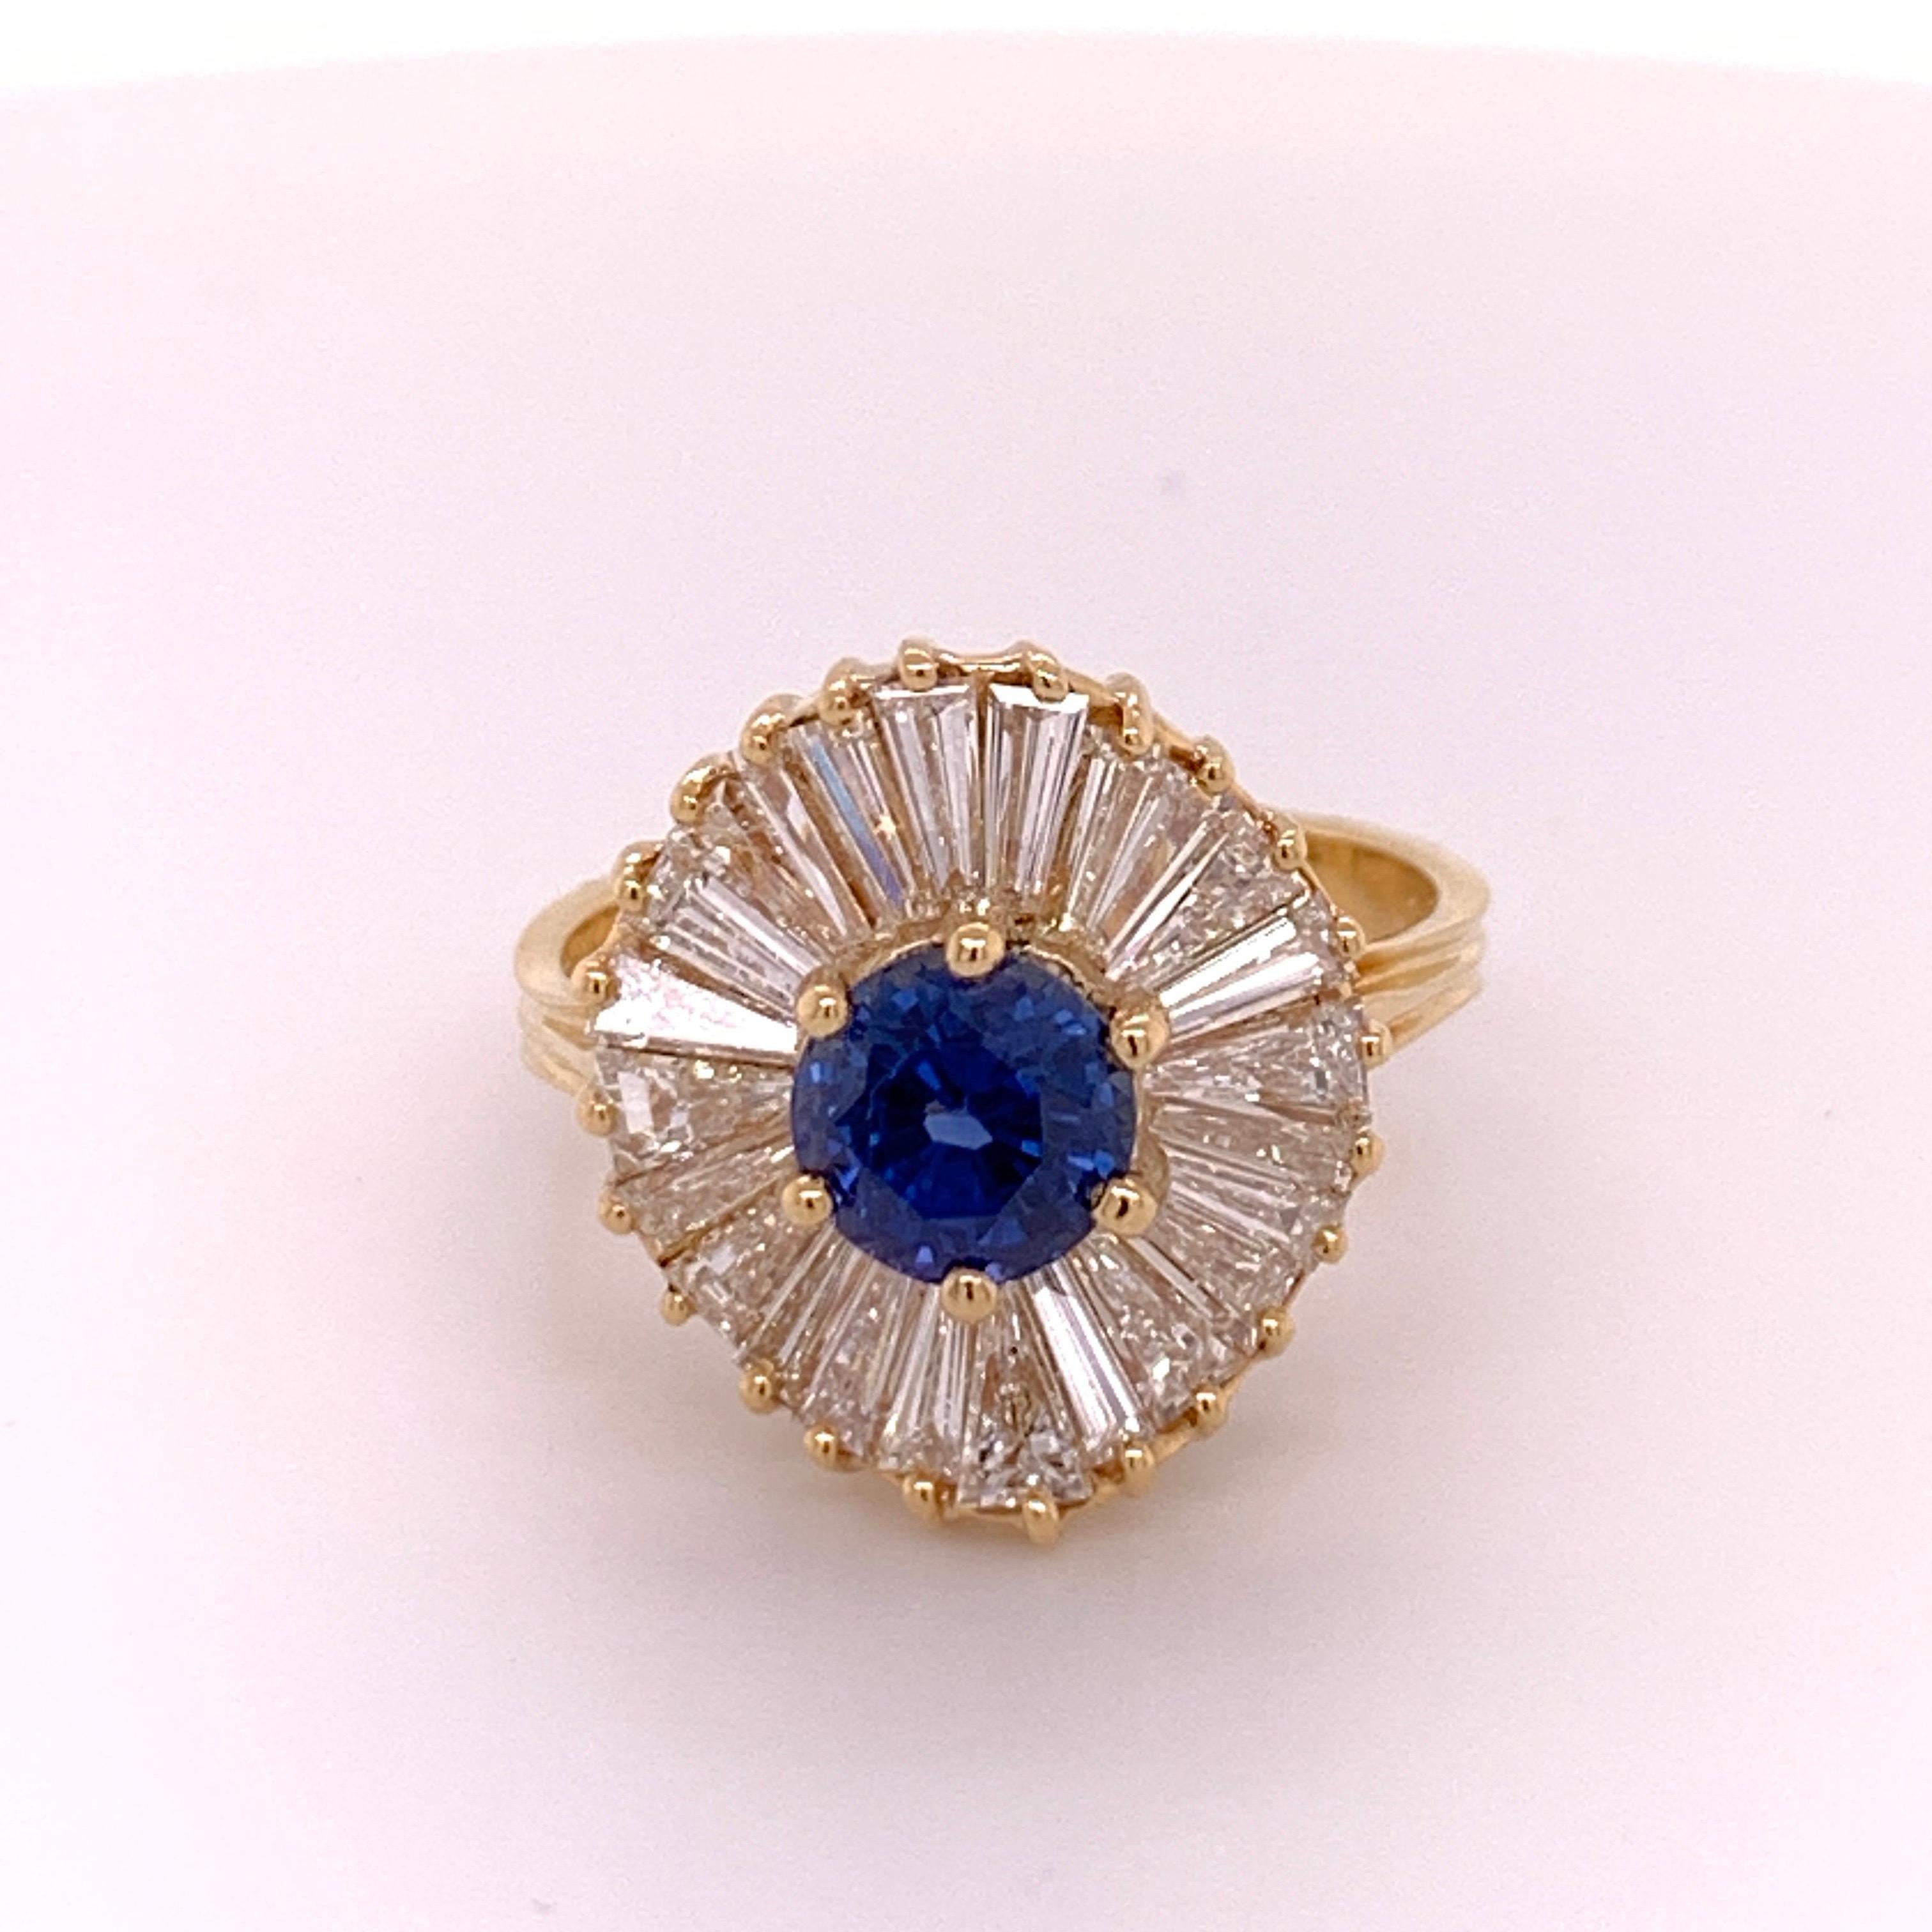 A vintage Ballerina ring by Herbert Rosenthal famous for the 